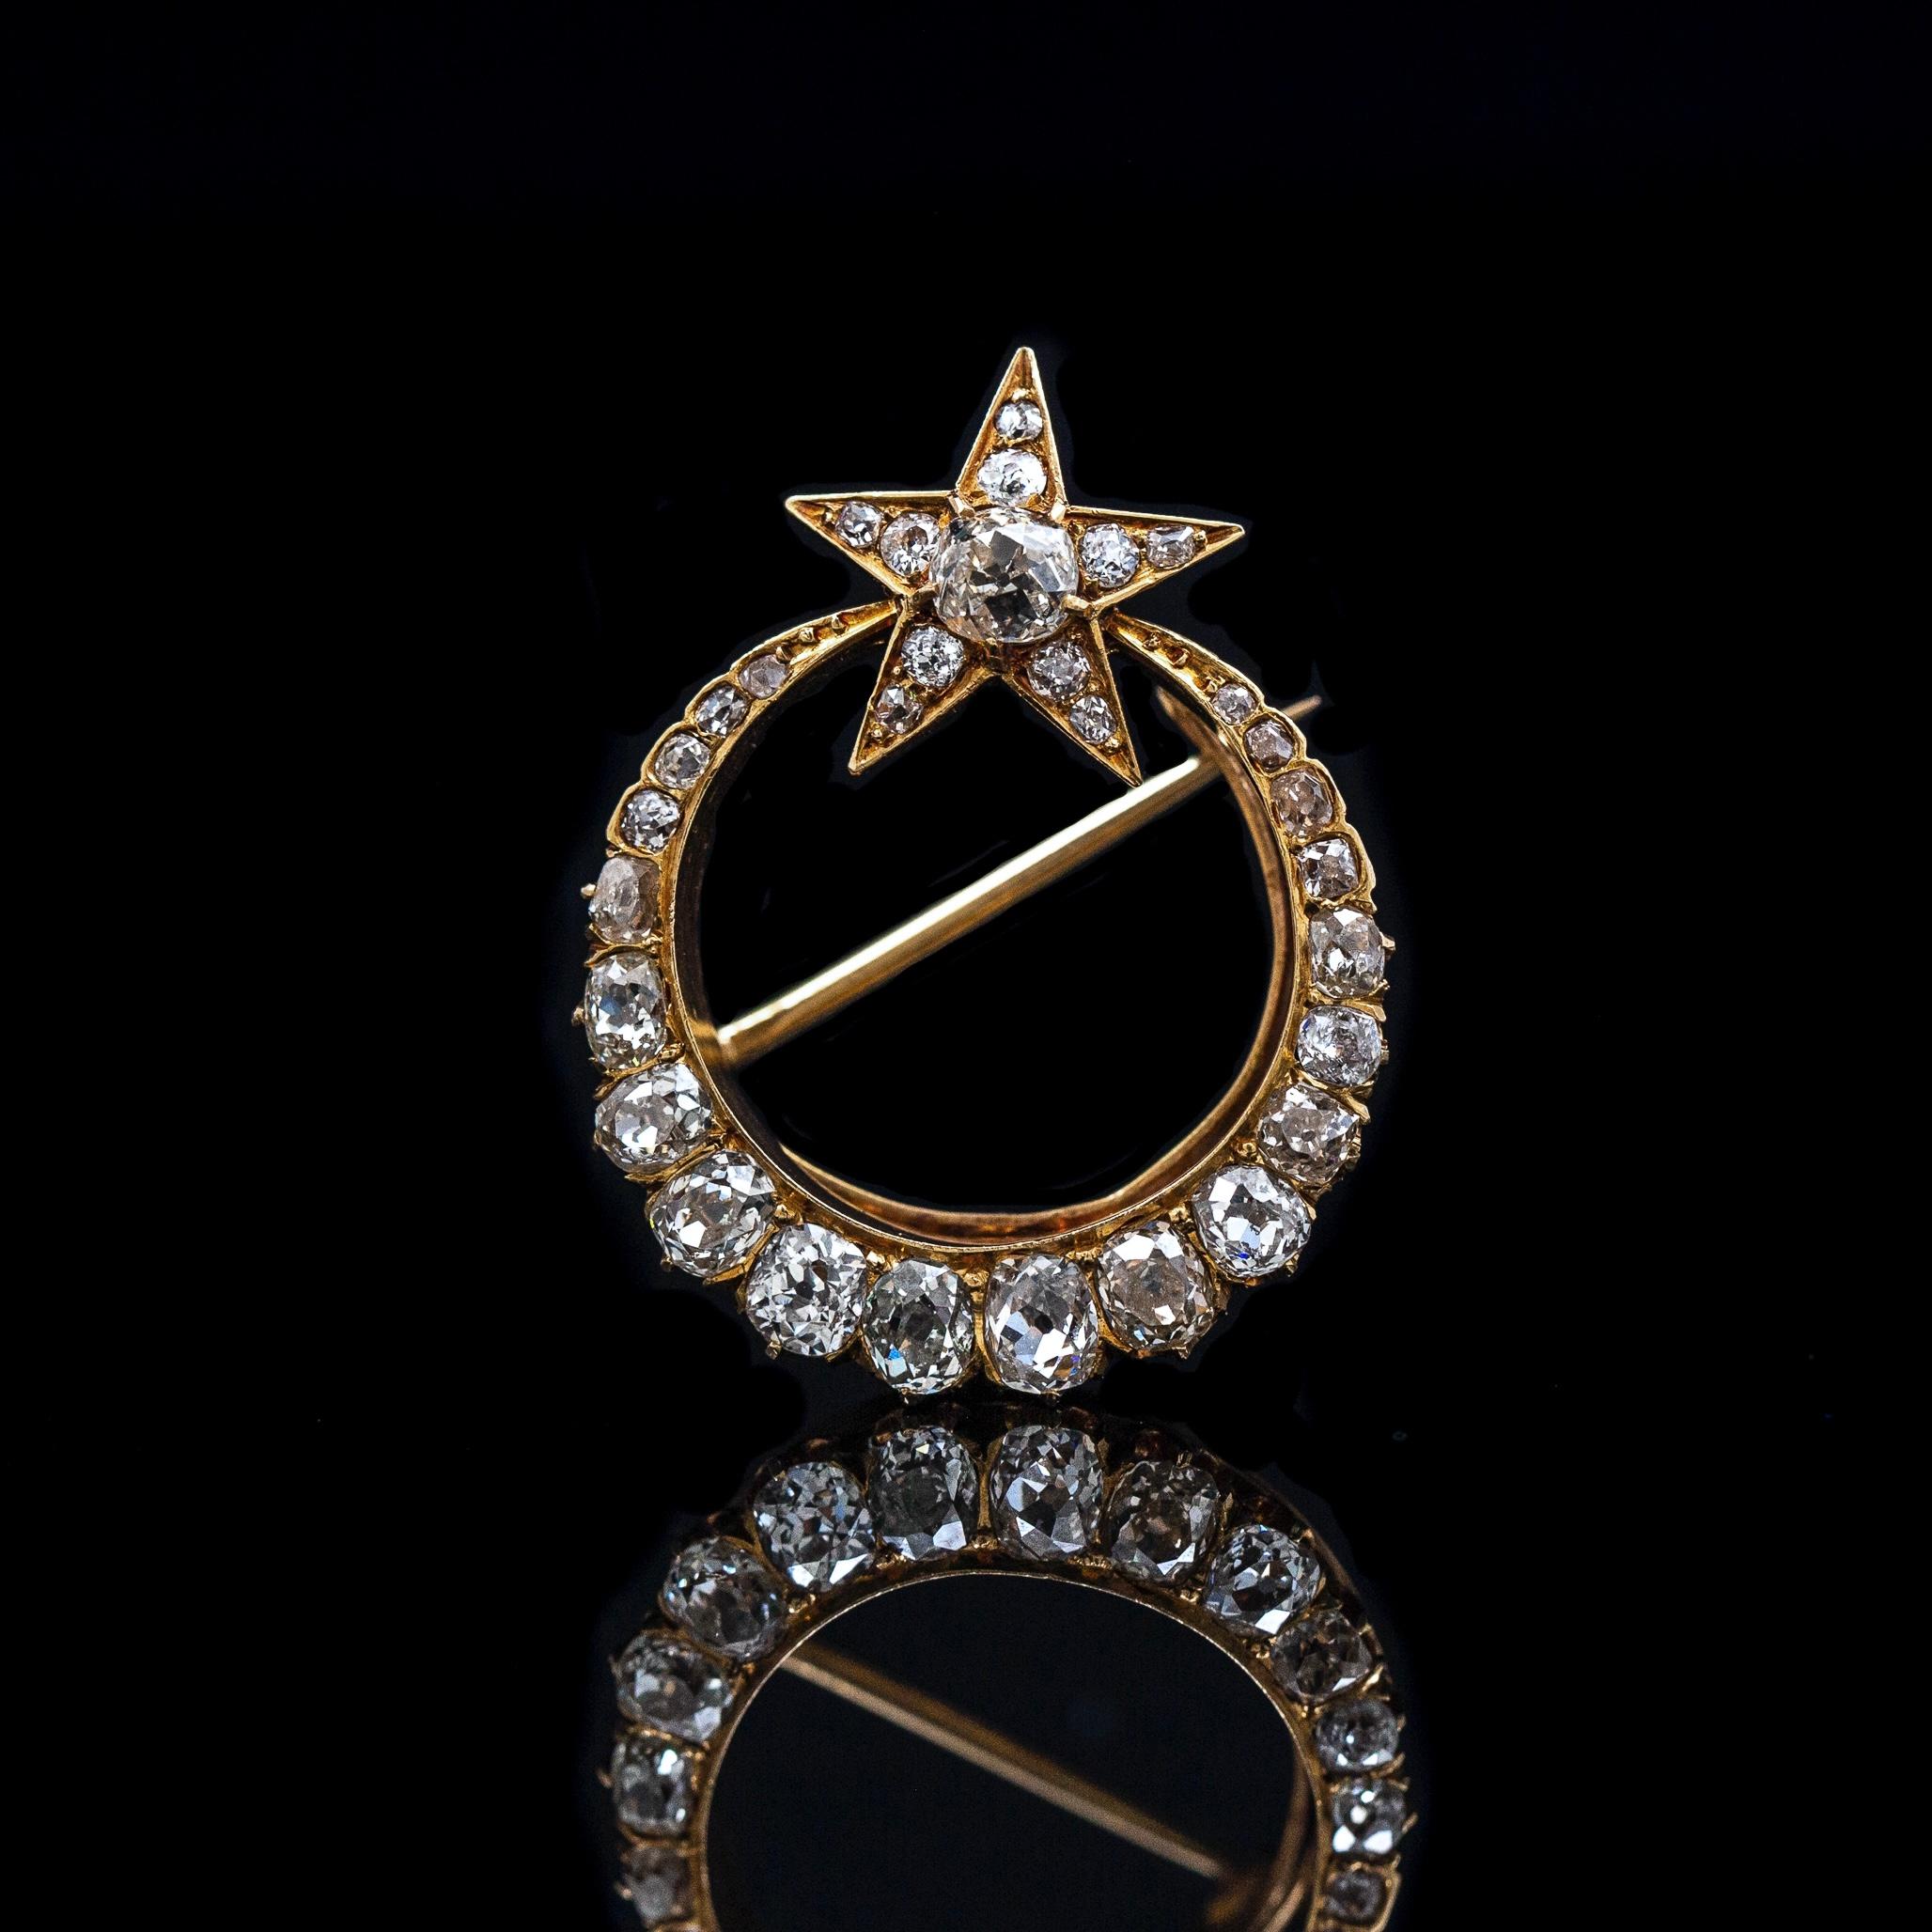 Antique 19th century Old Mine-cut Diamond crescent moon with star brooch / pendant in yellow gold, circa 1860. Designed as an elegant single-row crescent moon with a 5-point star at the opening, grain-set throughout with 31 Old Mine-cut diamonds